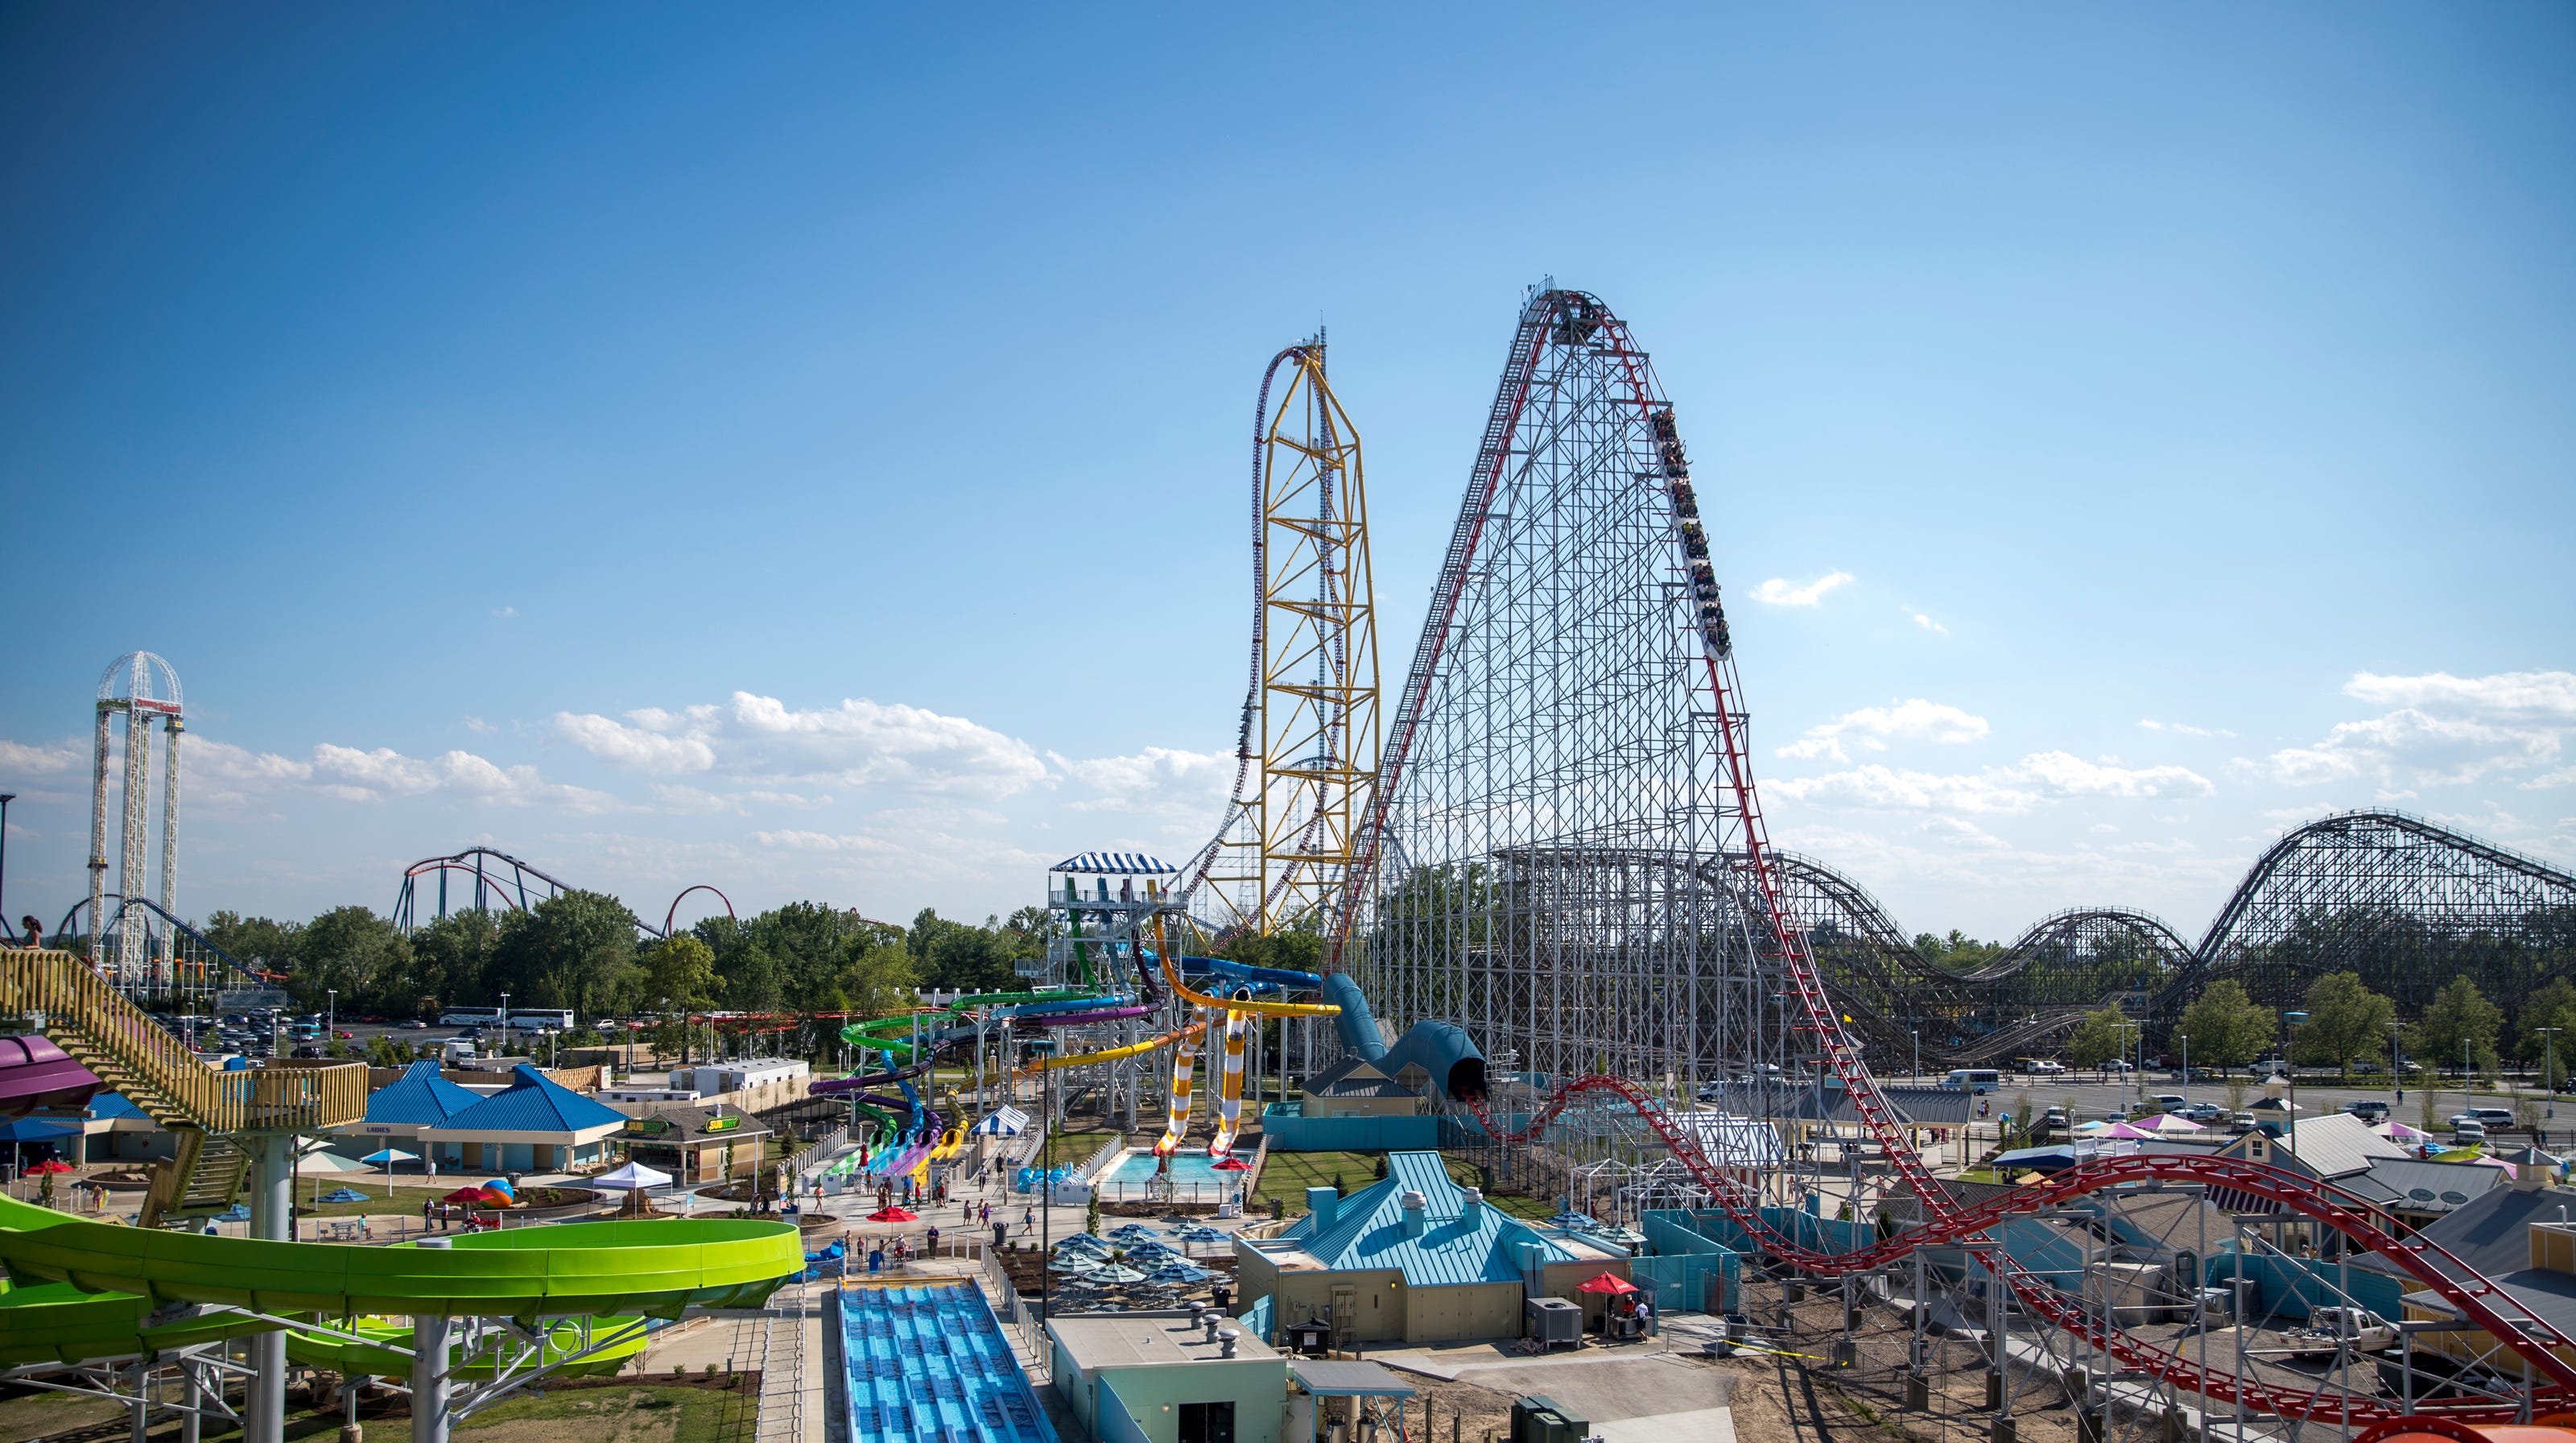 Cedar Point attractions What's coming to the amusement park in 2019?